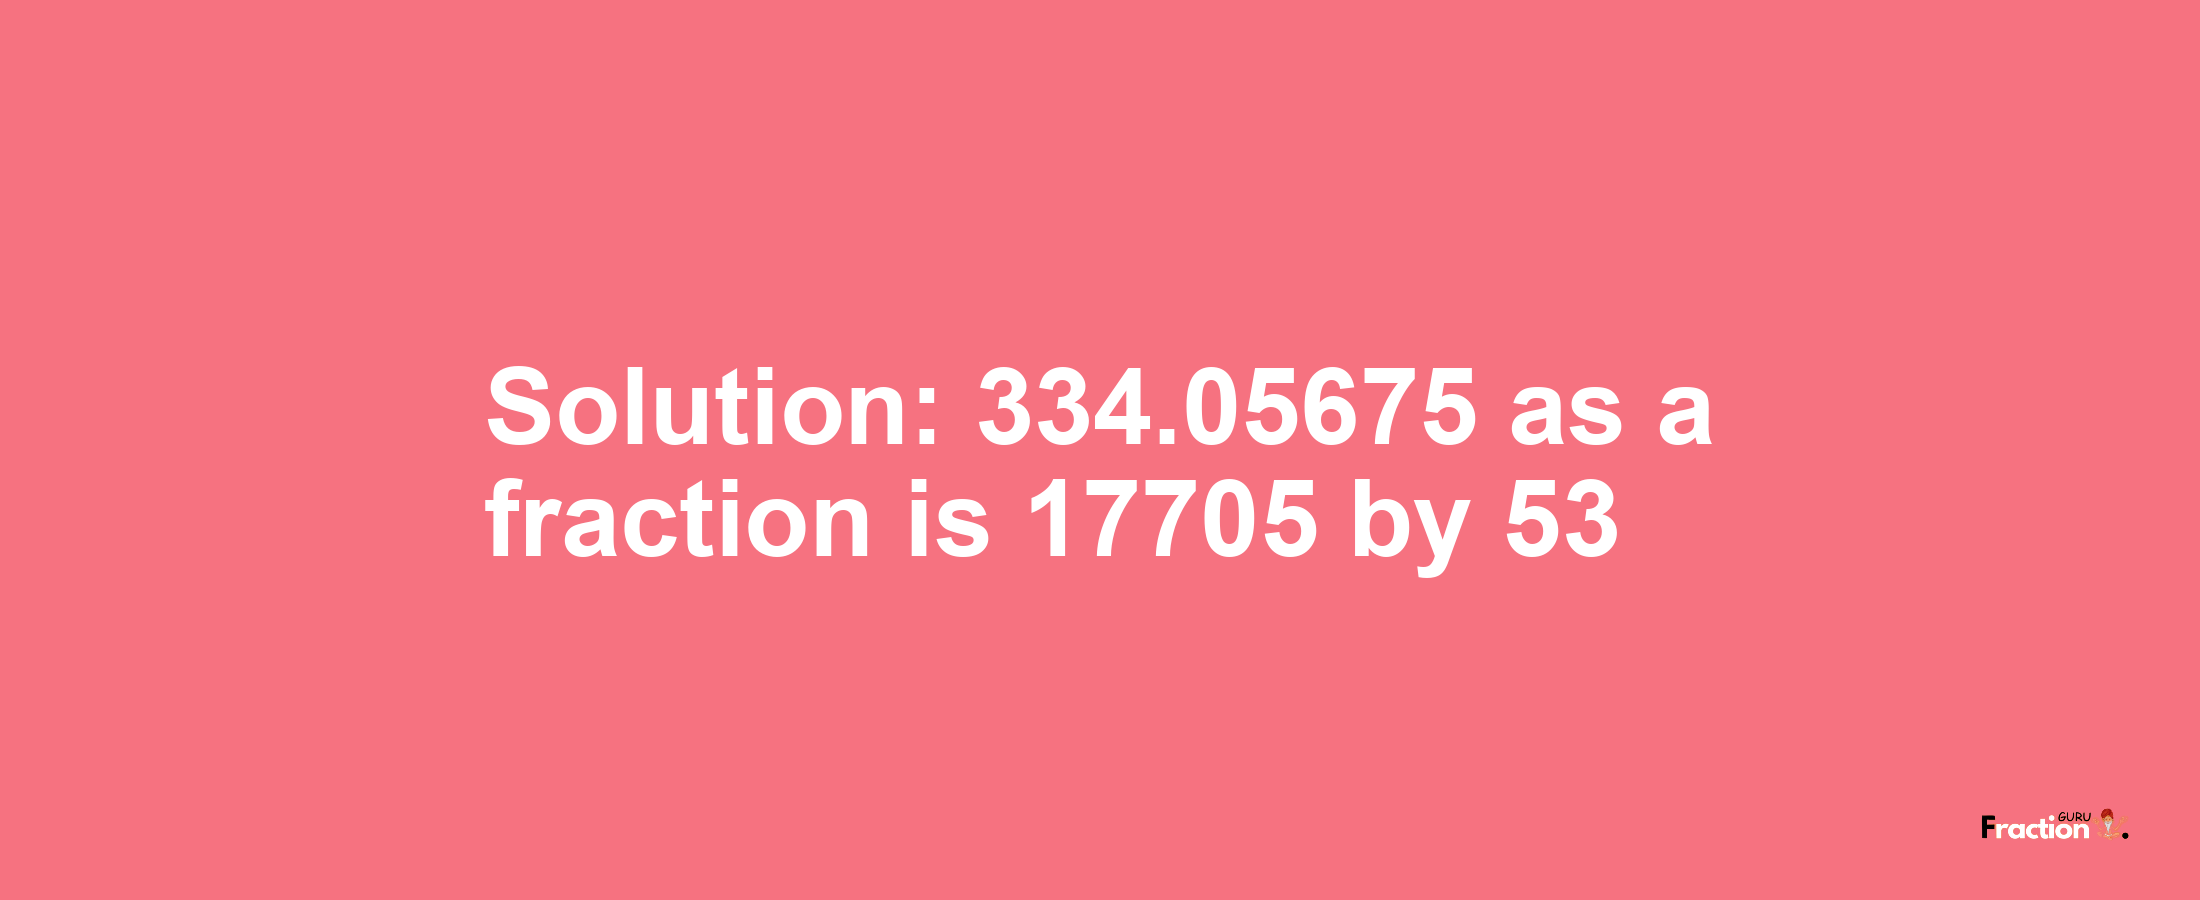 Solution:334.05675 as a fraction is 17705/53